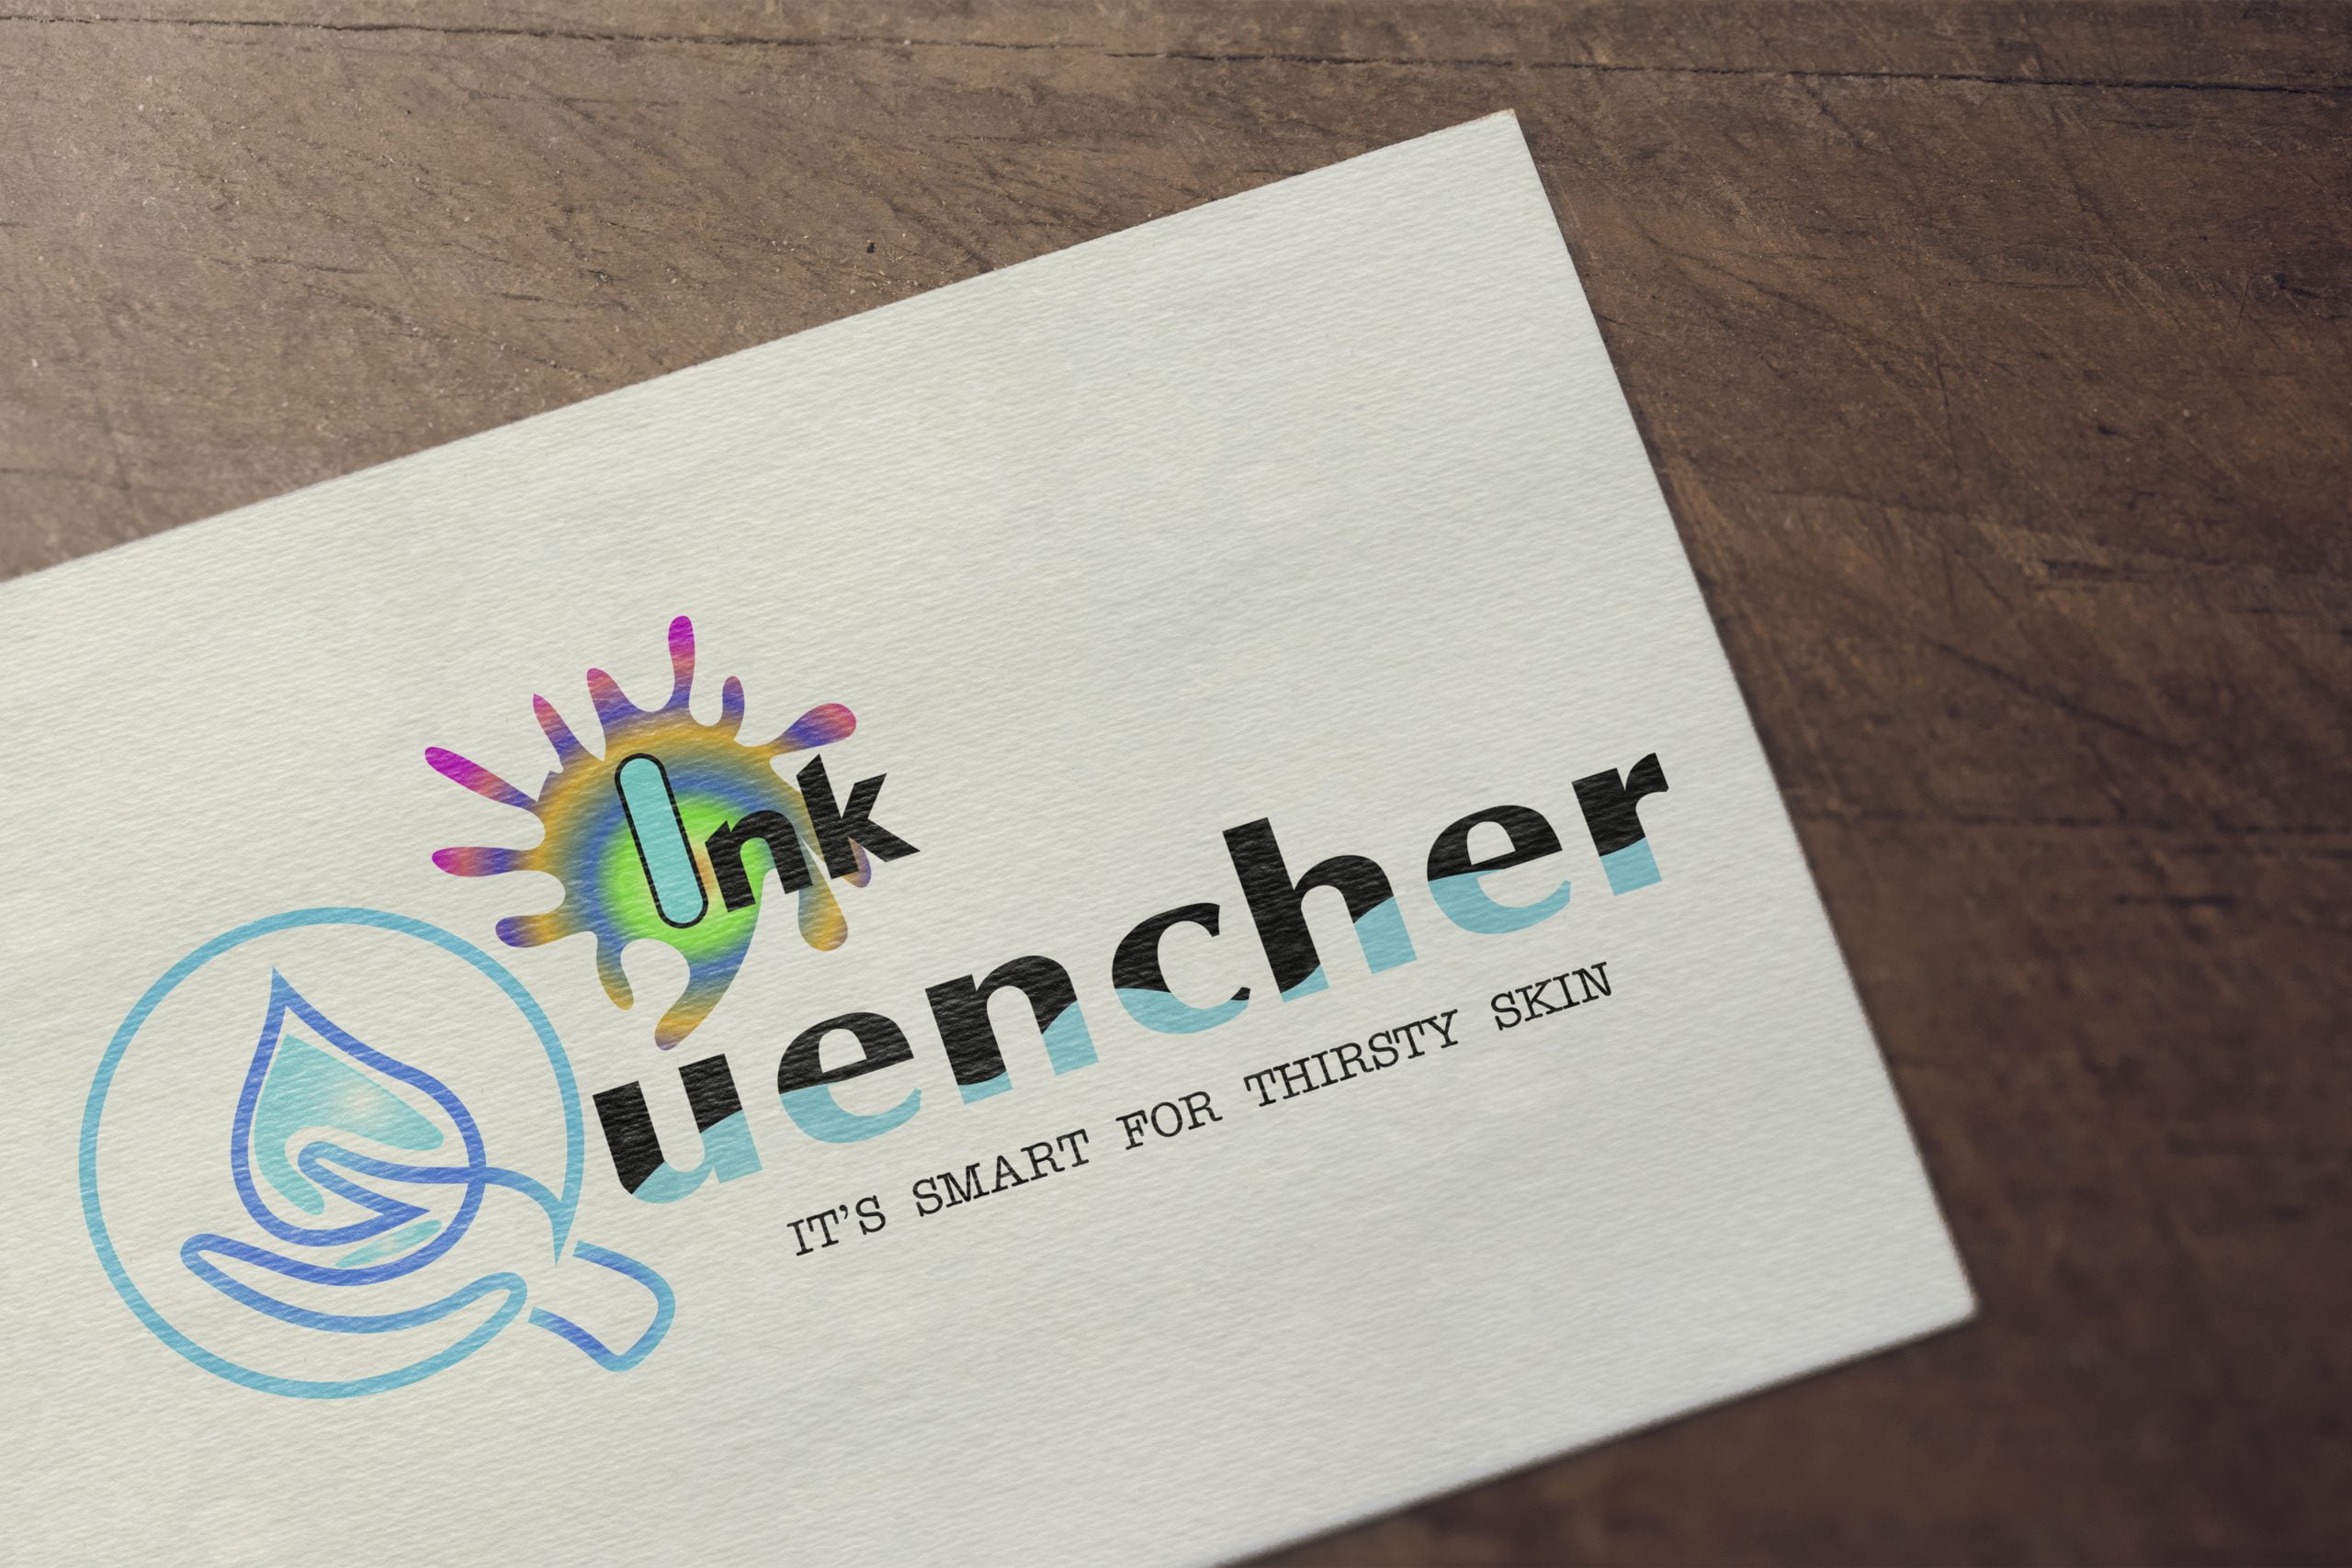 Ink quencher